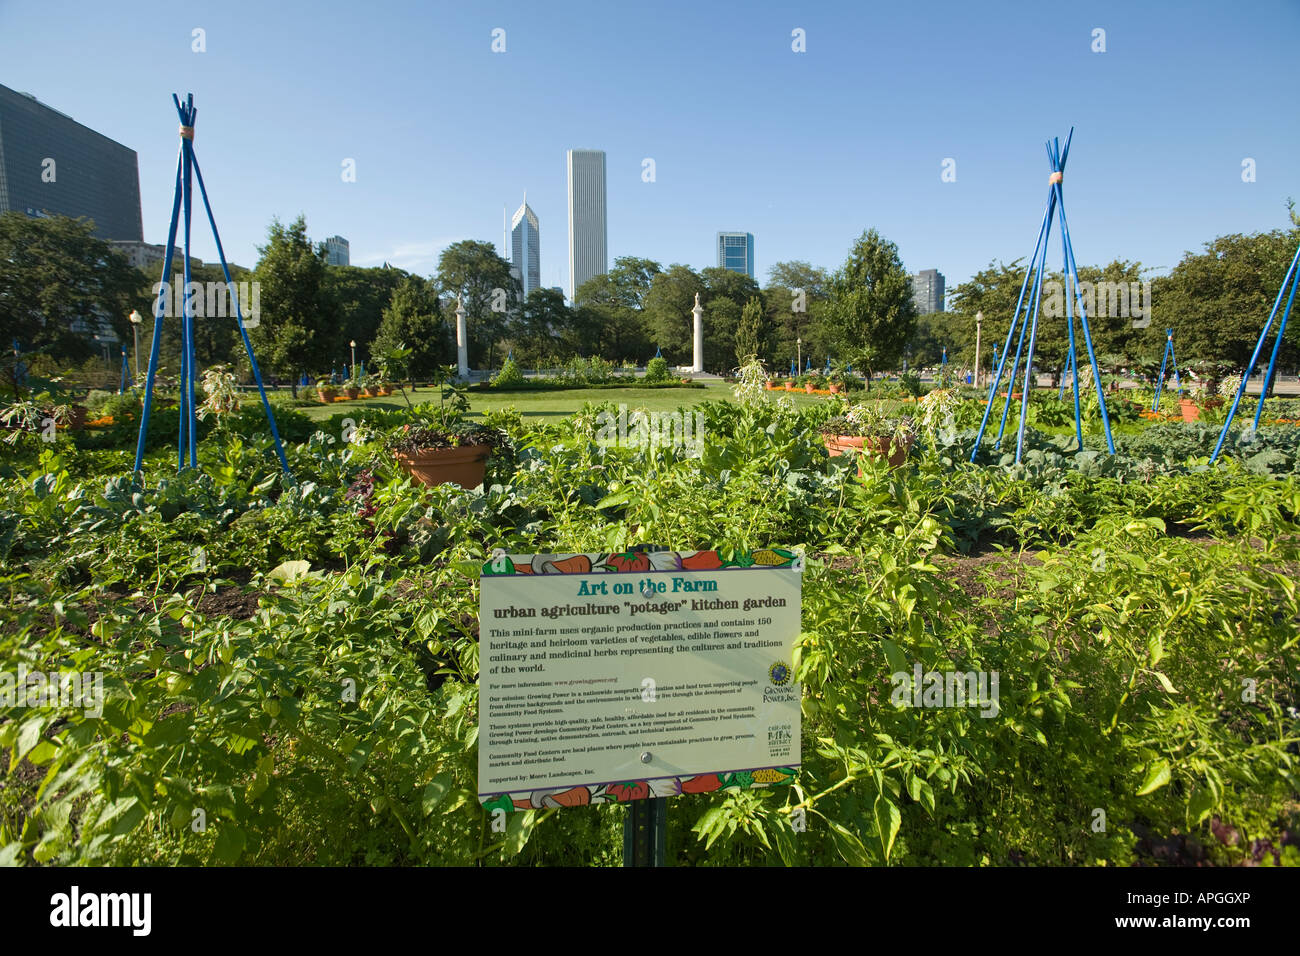 ILLINOIS Chicago Art on the Farm vegetable garden in Grant Park urban agriculture potager kitchen garden sign plants growing Stock Photo